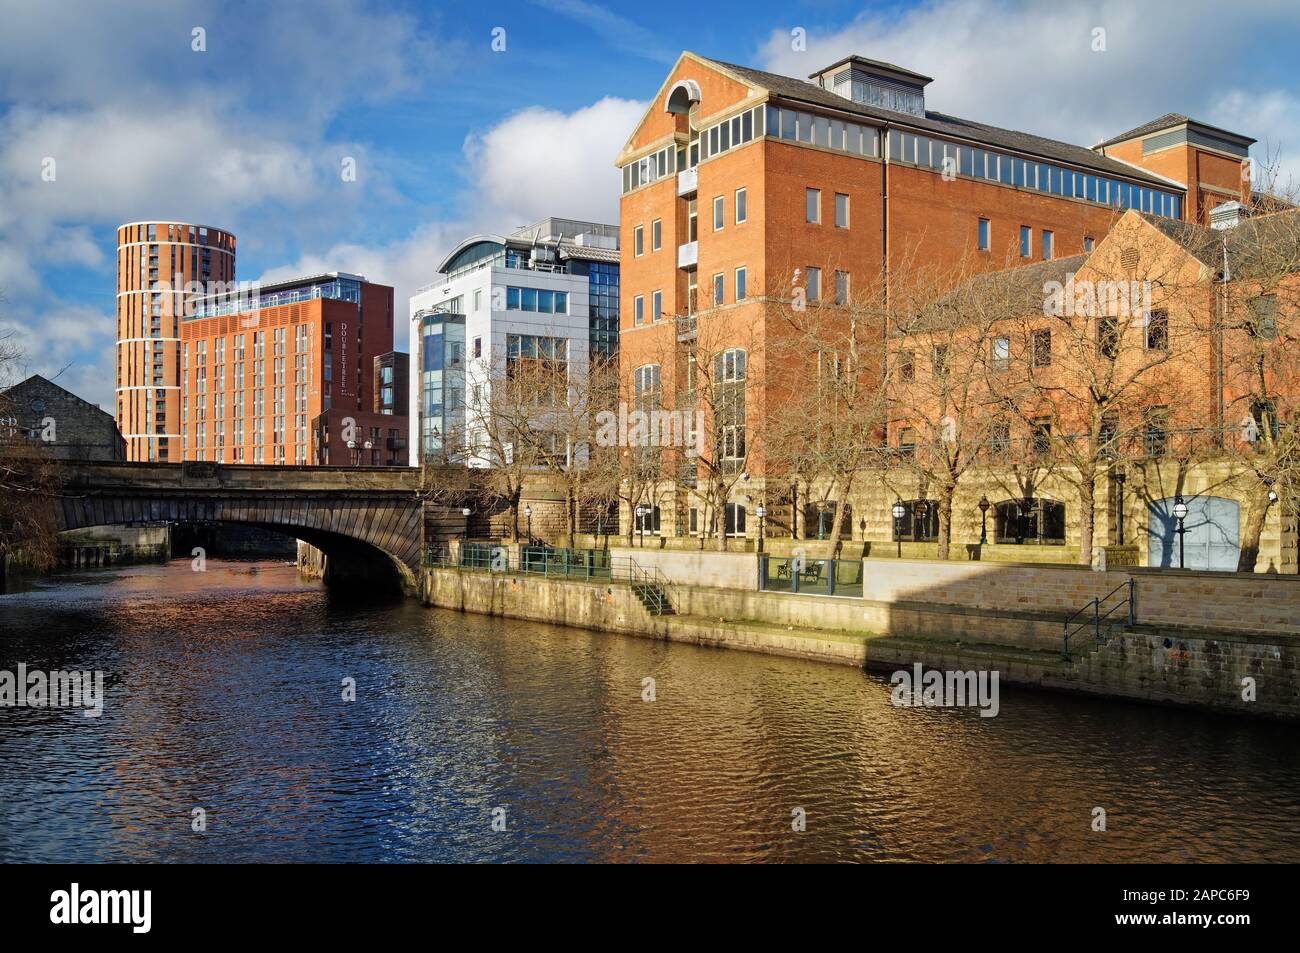 UK,West Yorkshire,Leeds,Victoria Bridge over the River Aire,surrounded by the Hilton Hotel,Office Buildings & Modern Waterfront Apartments. Stock Photo